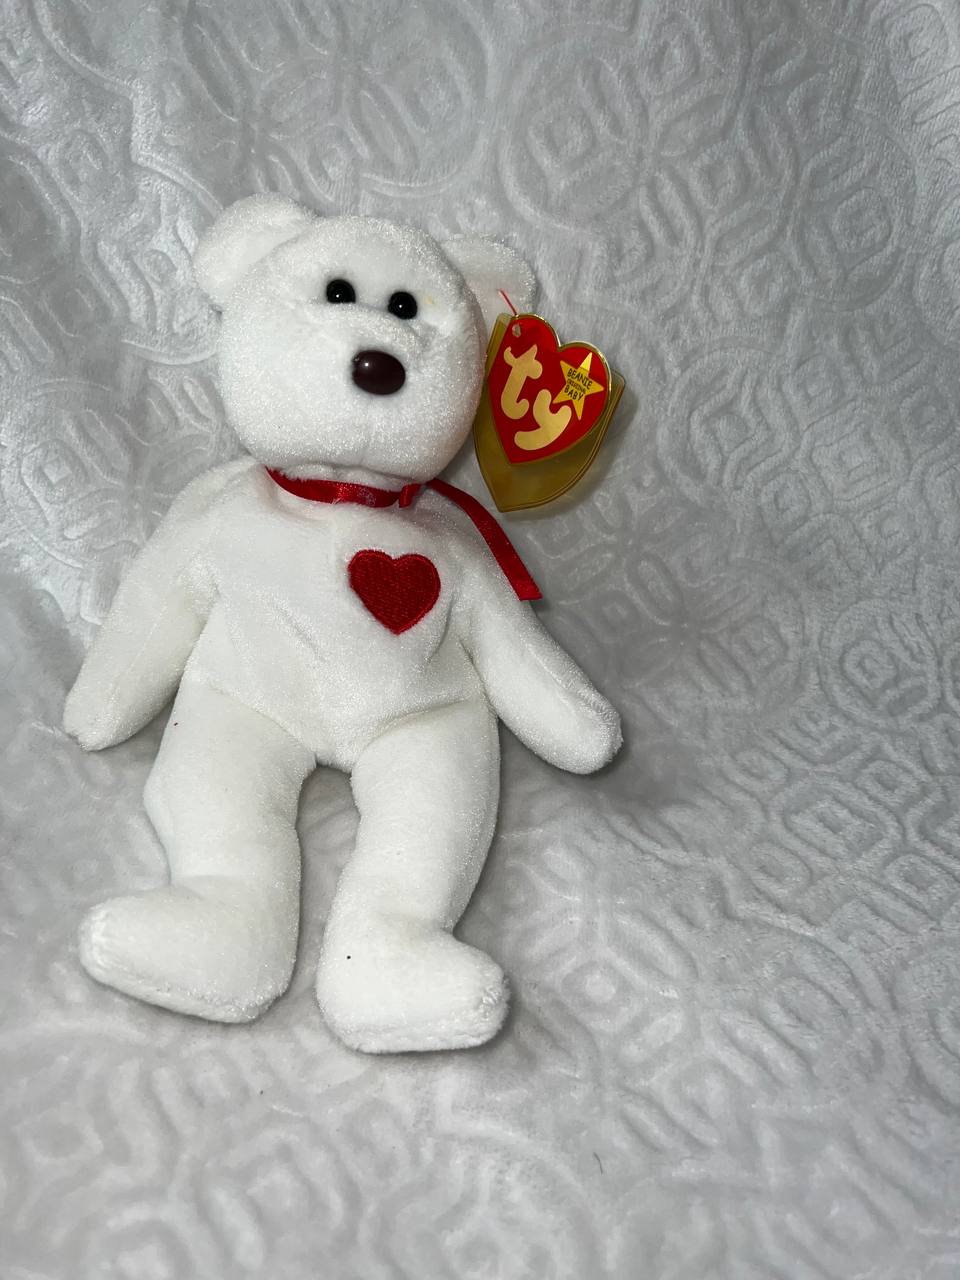 *RARE* MINT Valentino Beanie Baby 1994 With Tag